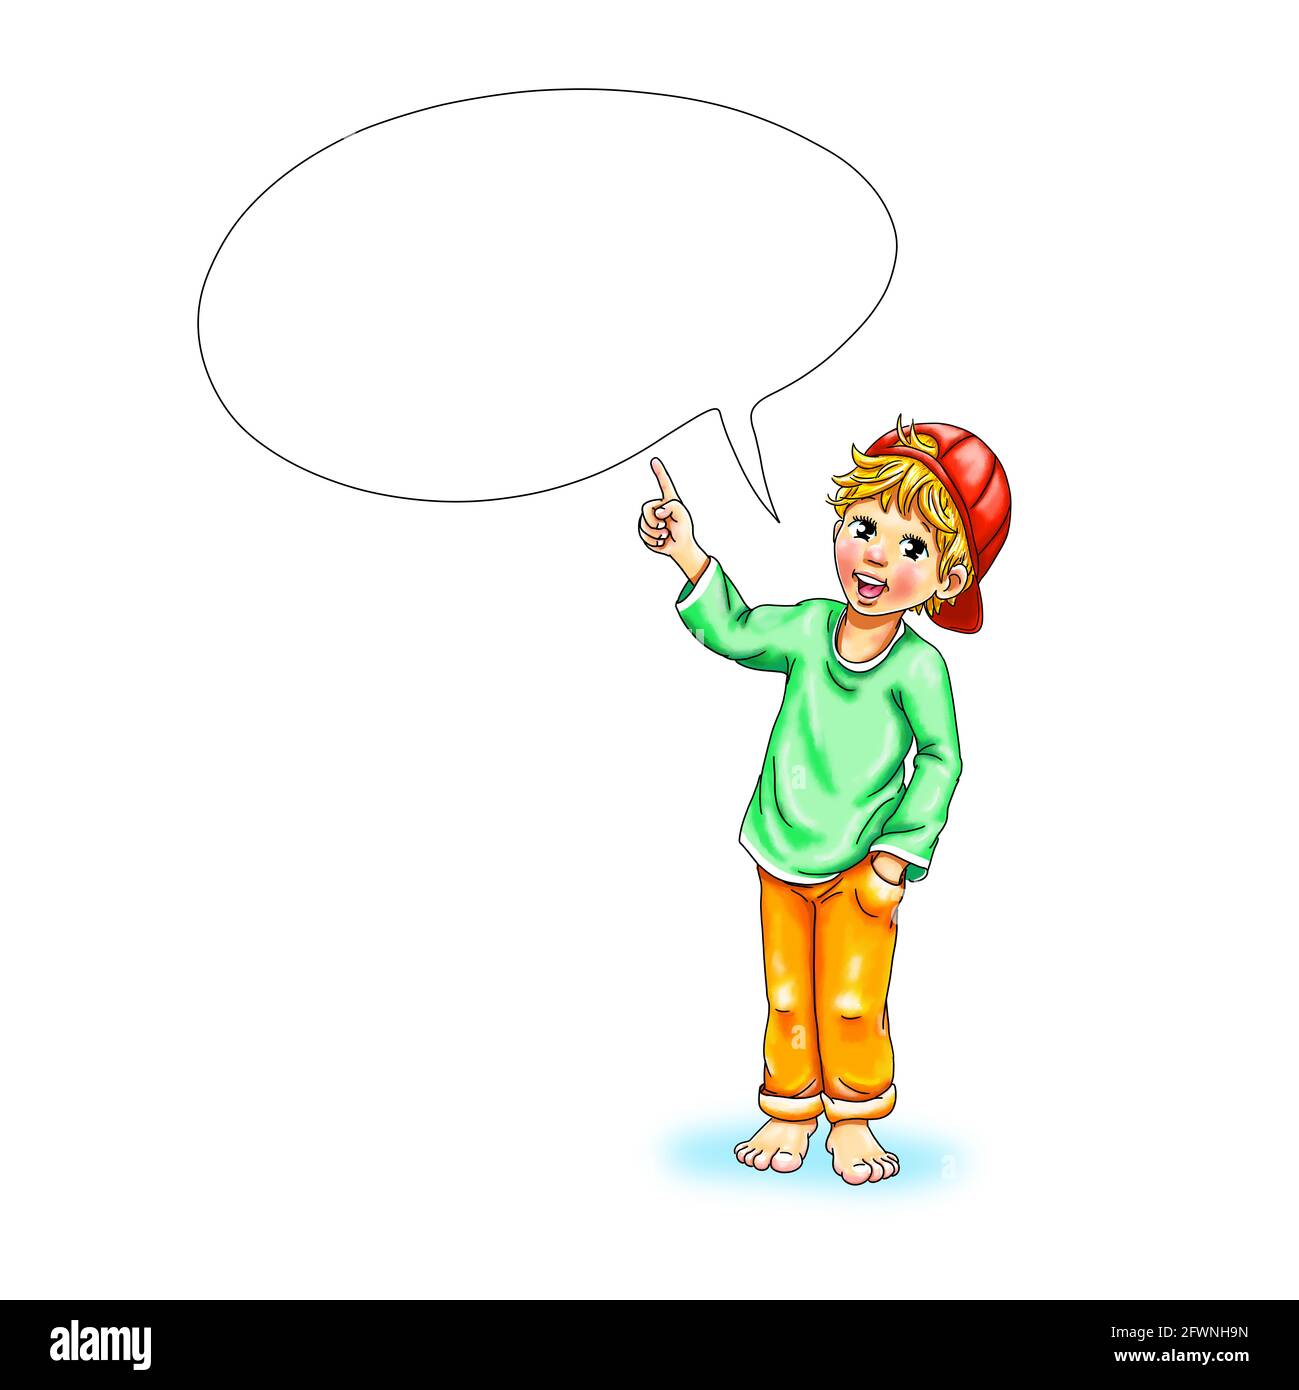 Young toddler with cap stands smiling barefoot student teenager pointing finger pointing laughing joy note loose background white education business Stock Photo